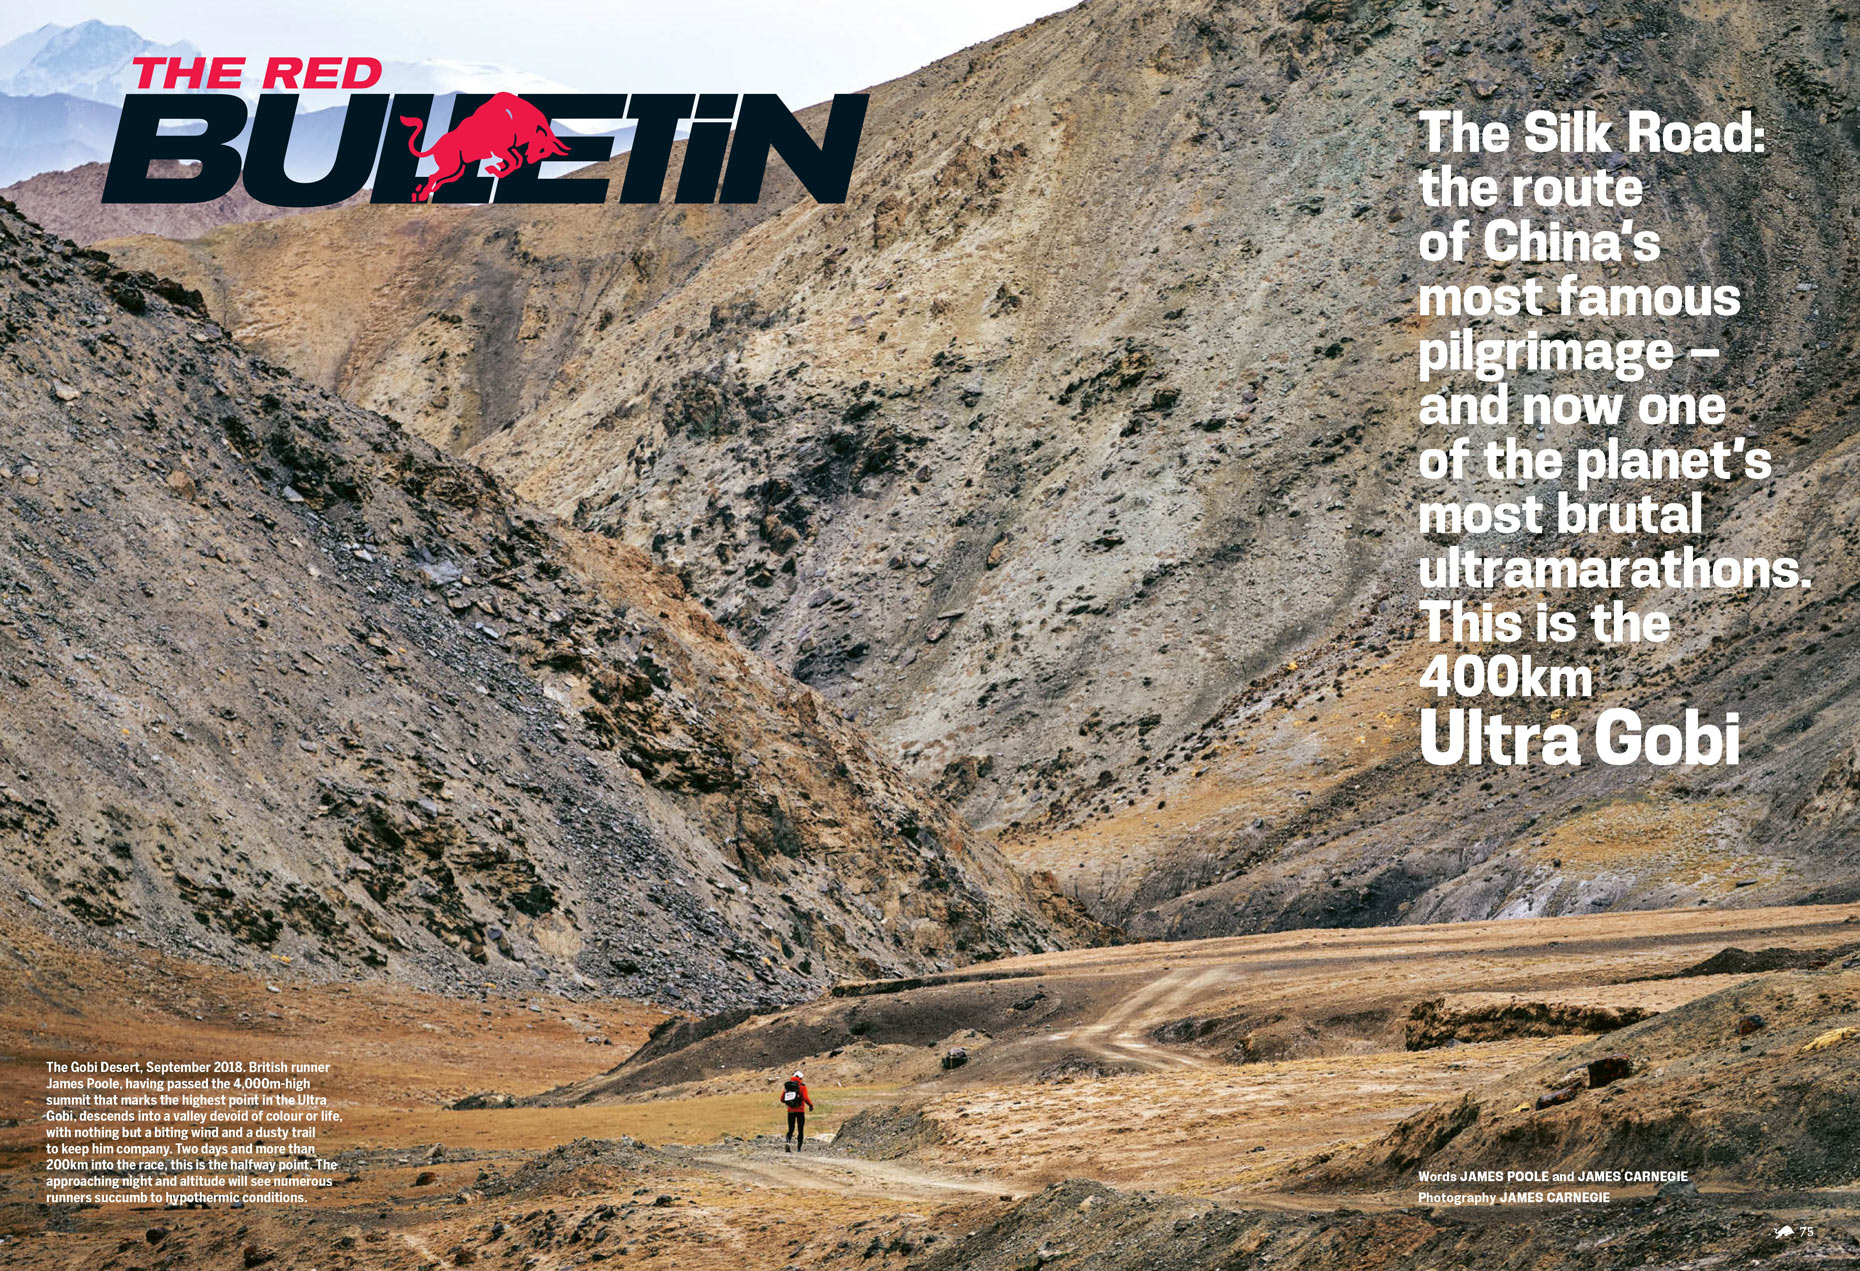 The Red Bulletin Ultra Gobi feature